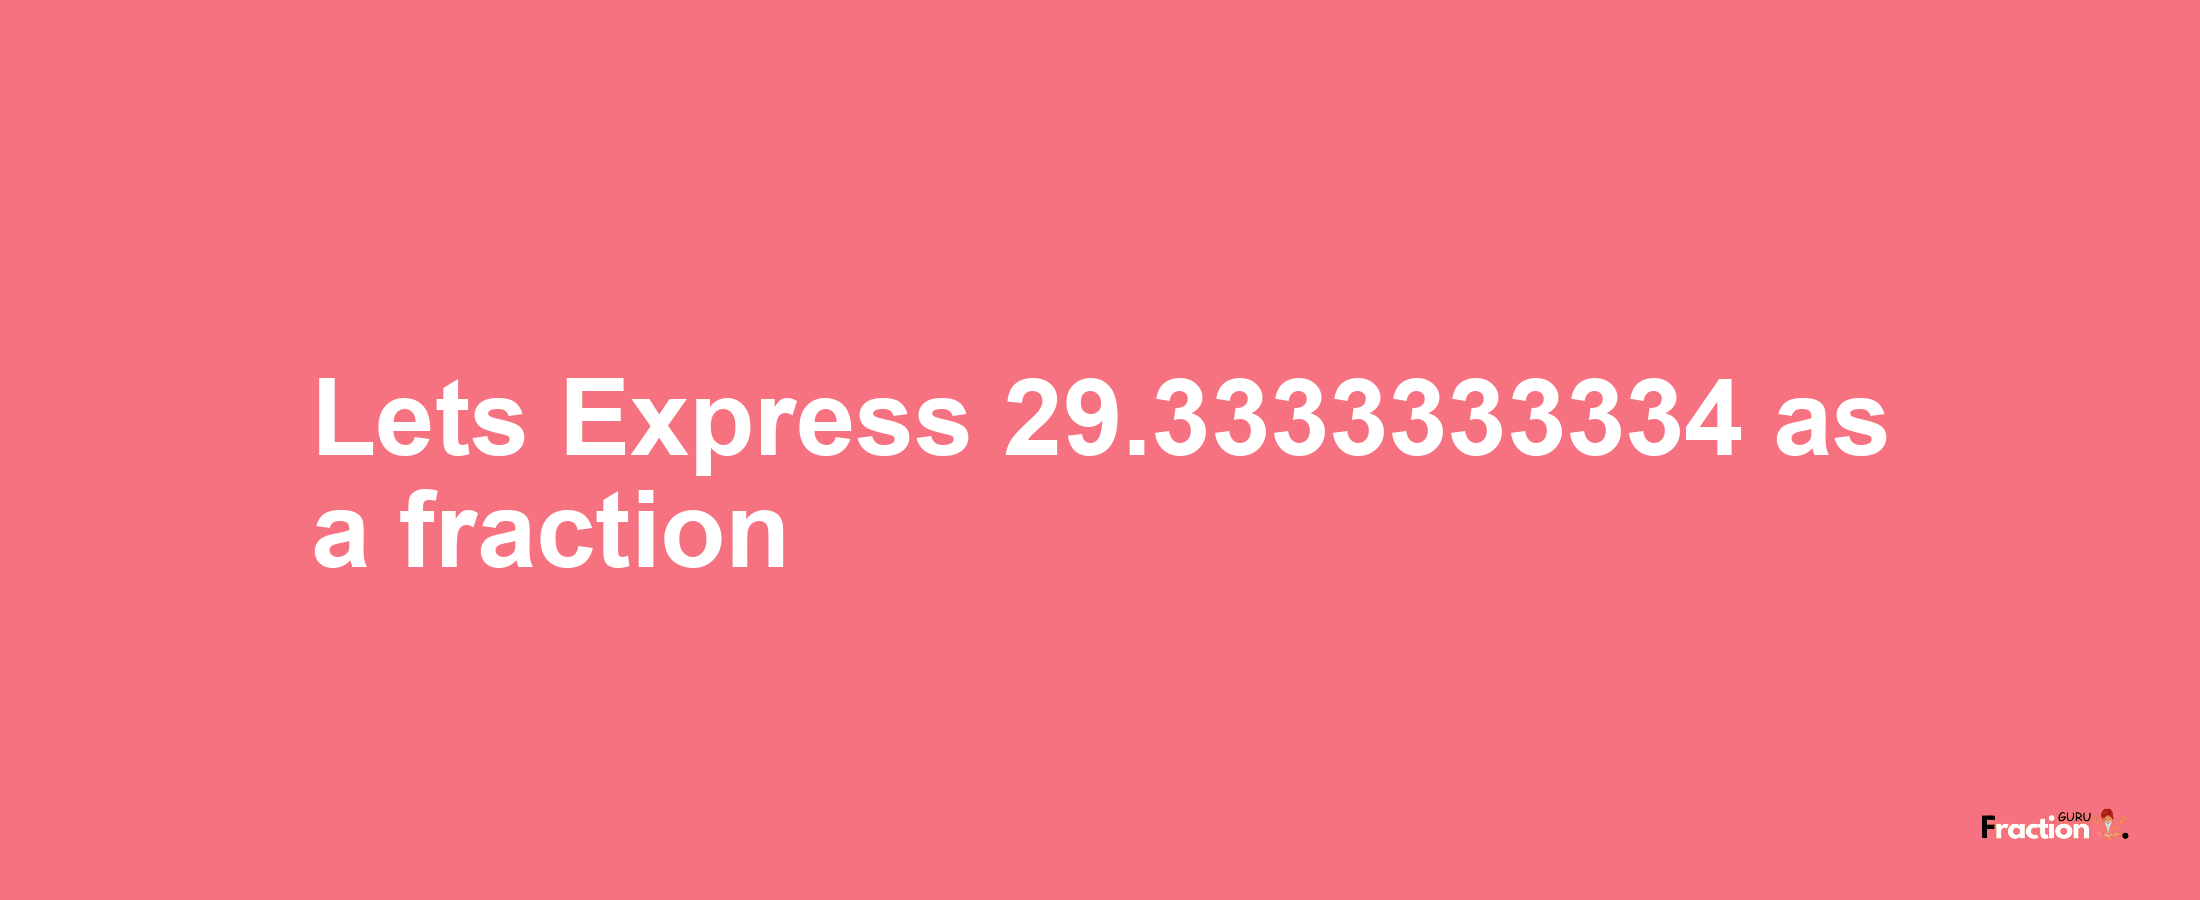 Lets Express 29.3333333334 as afraction